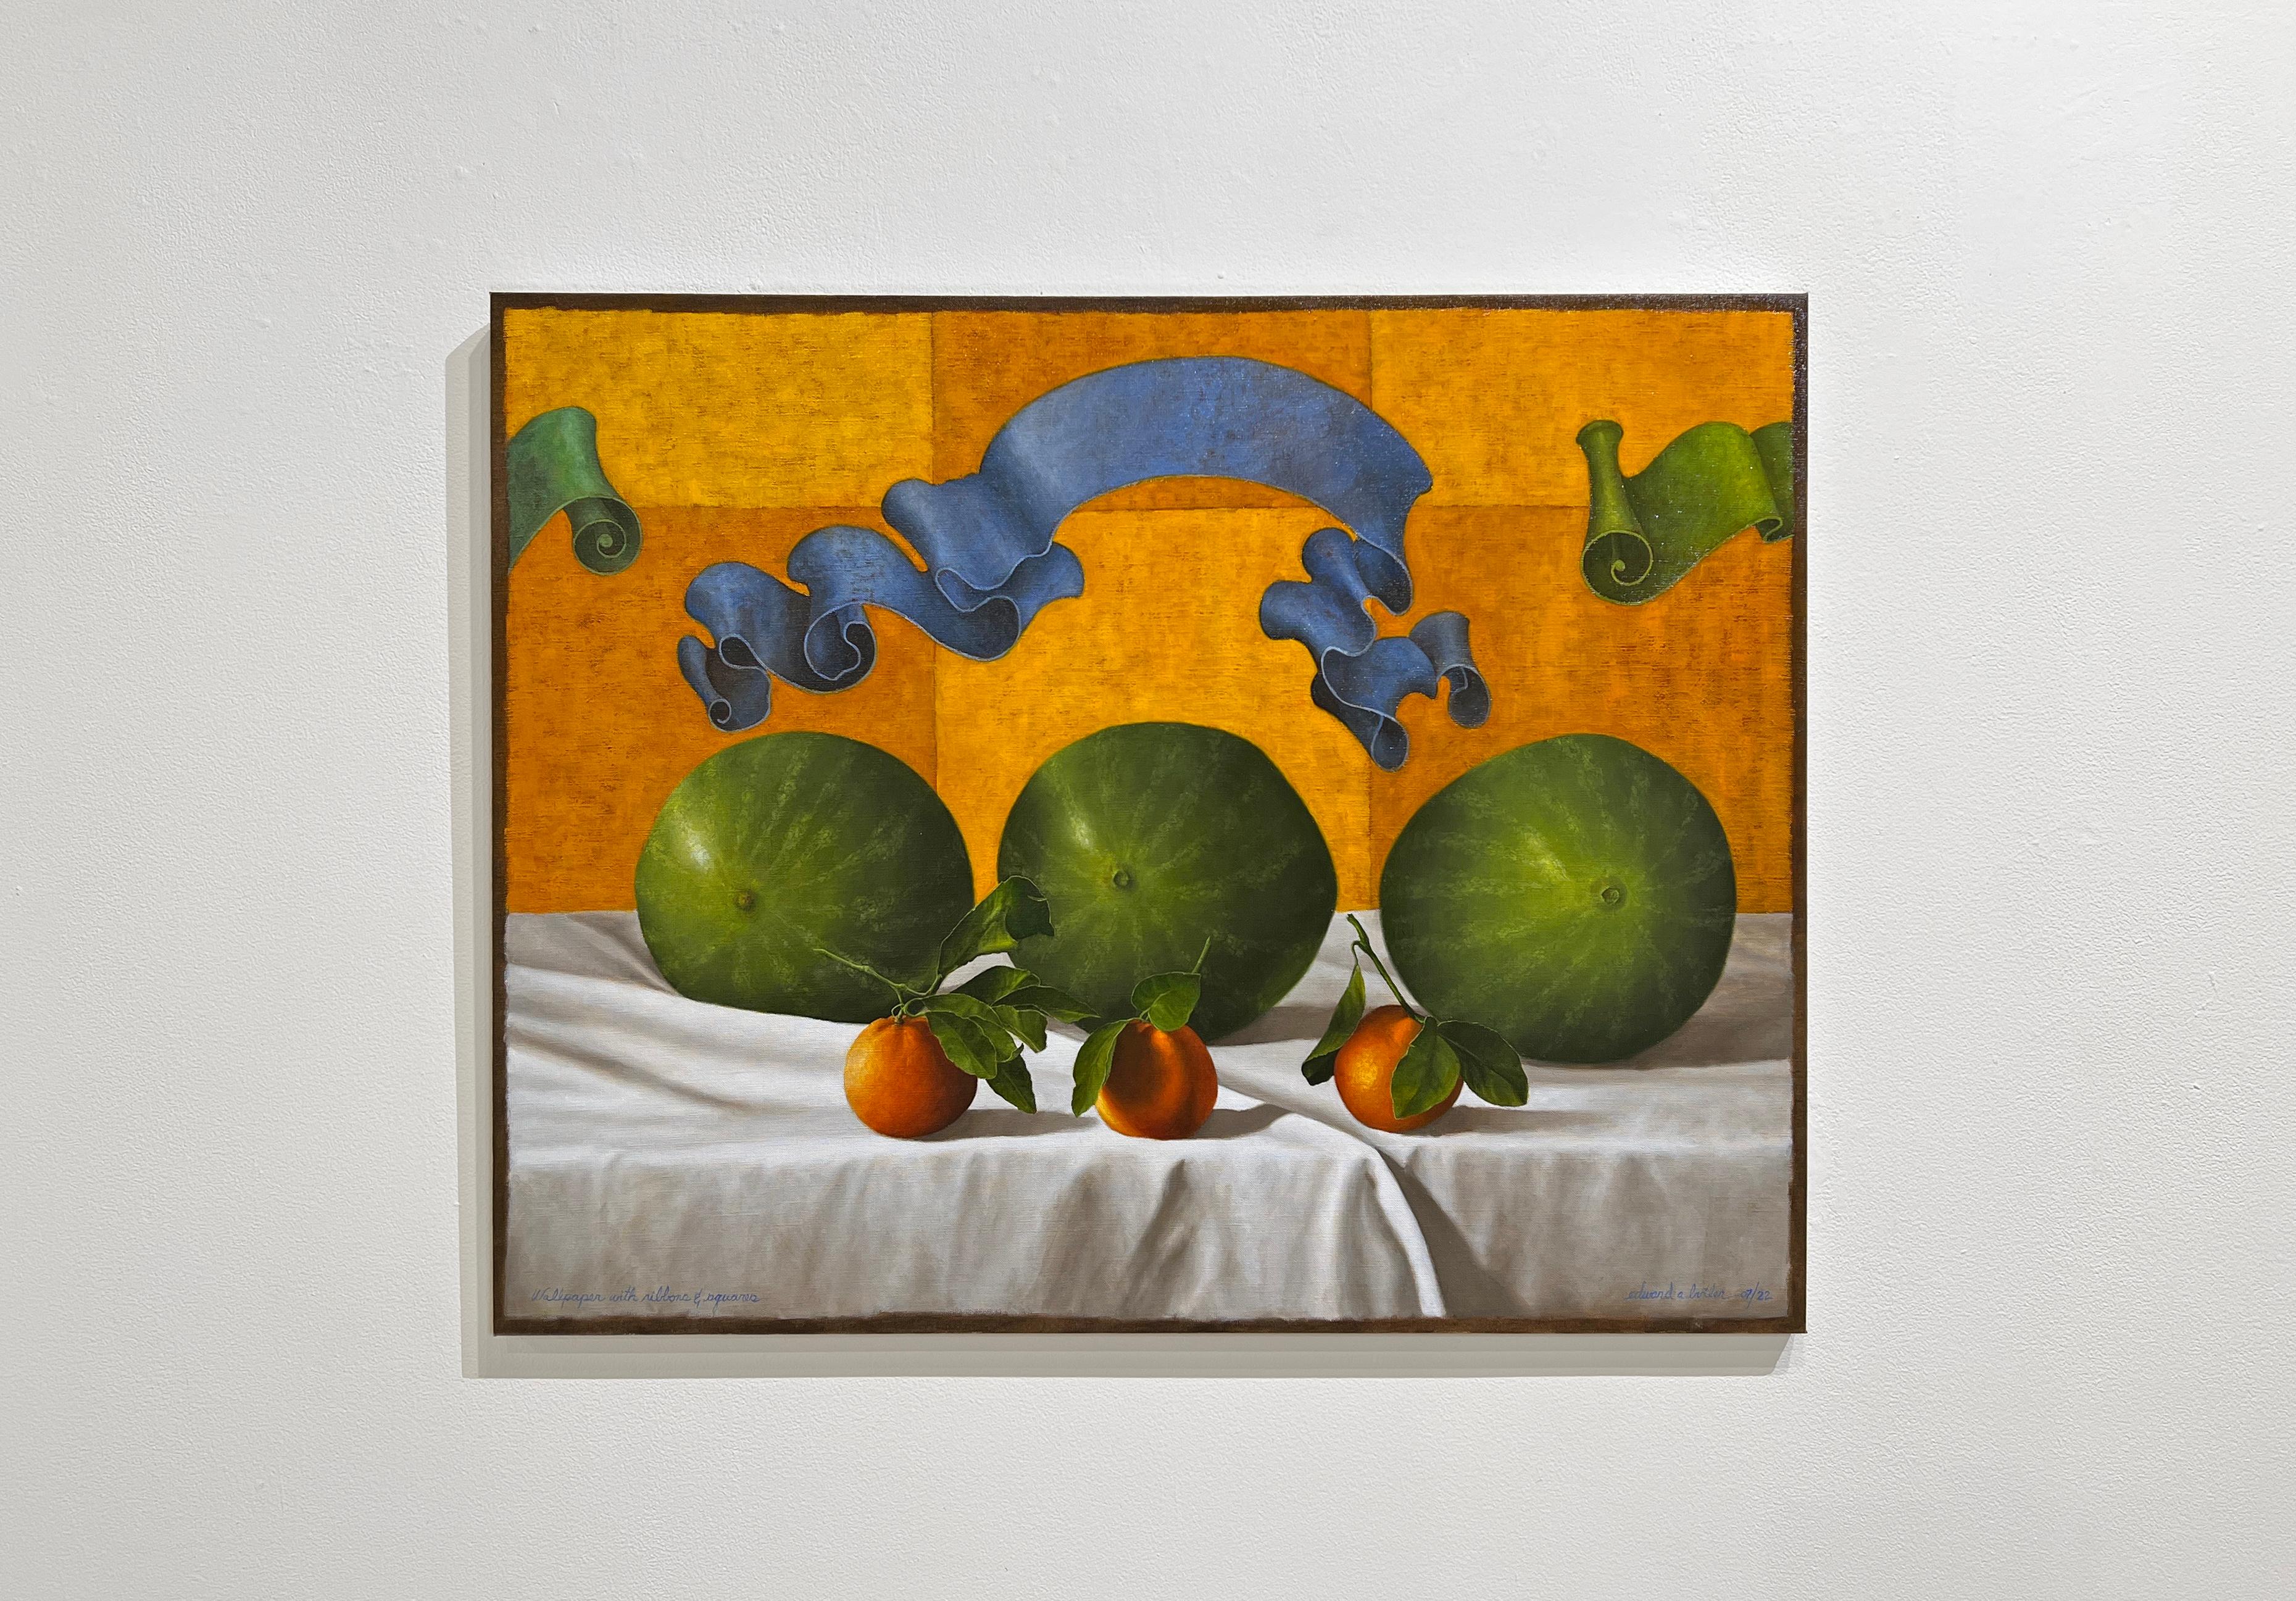 WALLPAPER WITH RIBBONS & SQUARES - Contemporary Still Life / Realism / Fruit - Painting by Edward A. Butler